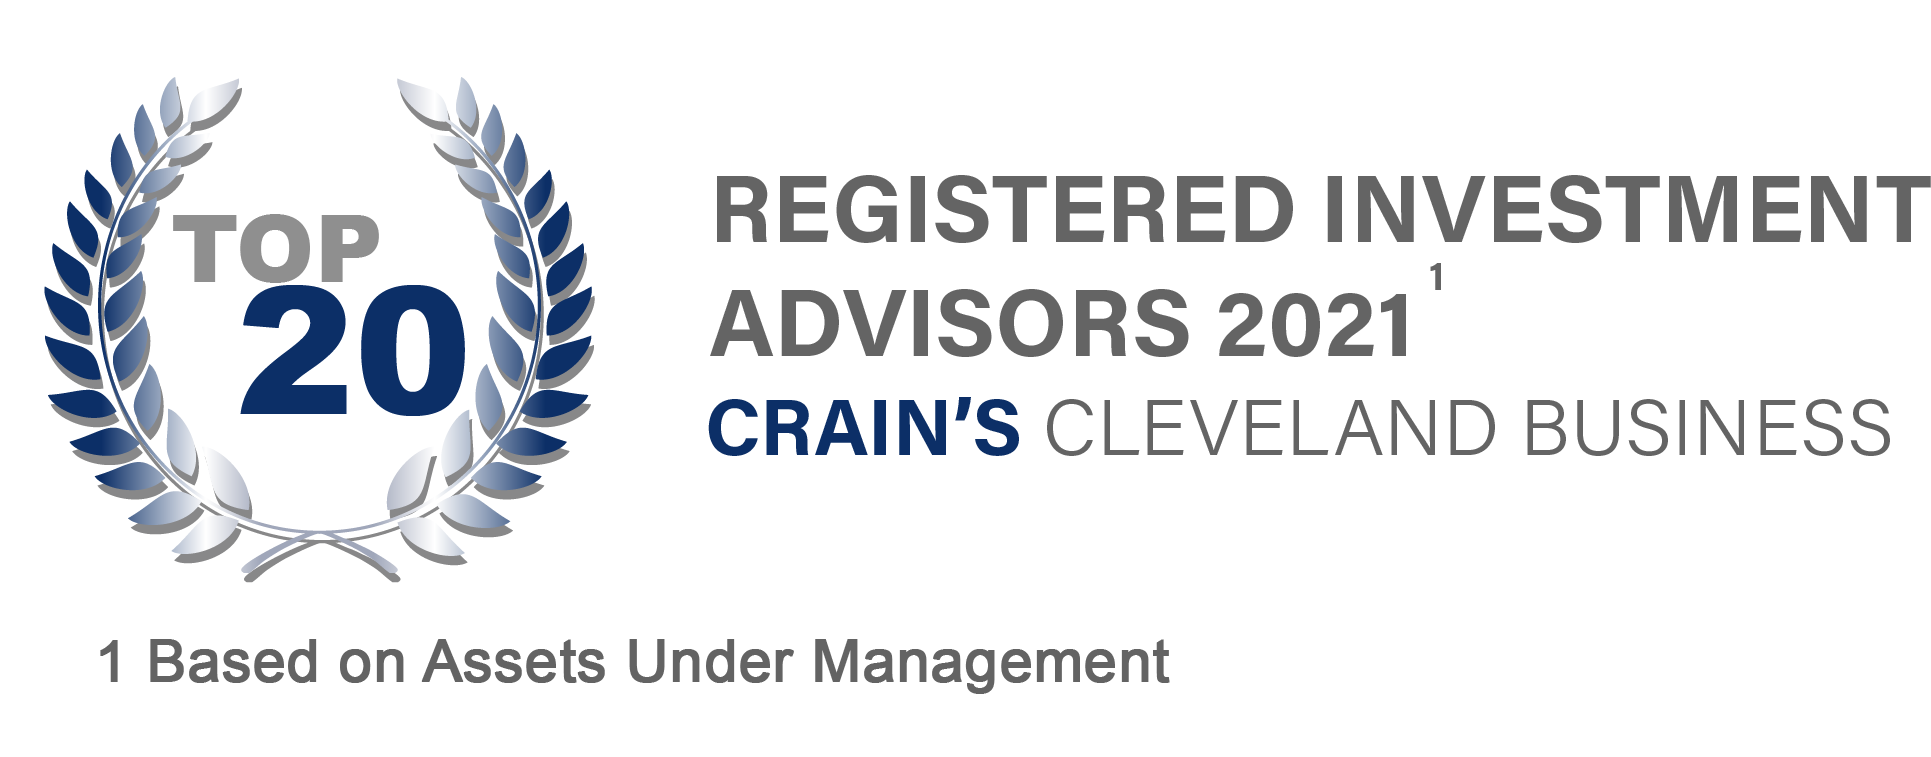 Lineweaver Wealth Advisors enters the top 20 in the Crains 2021 List of Registered Investment Advisers